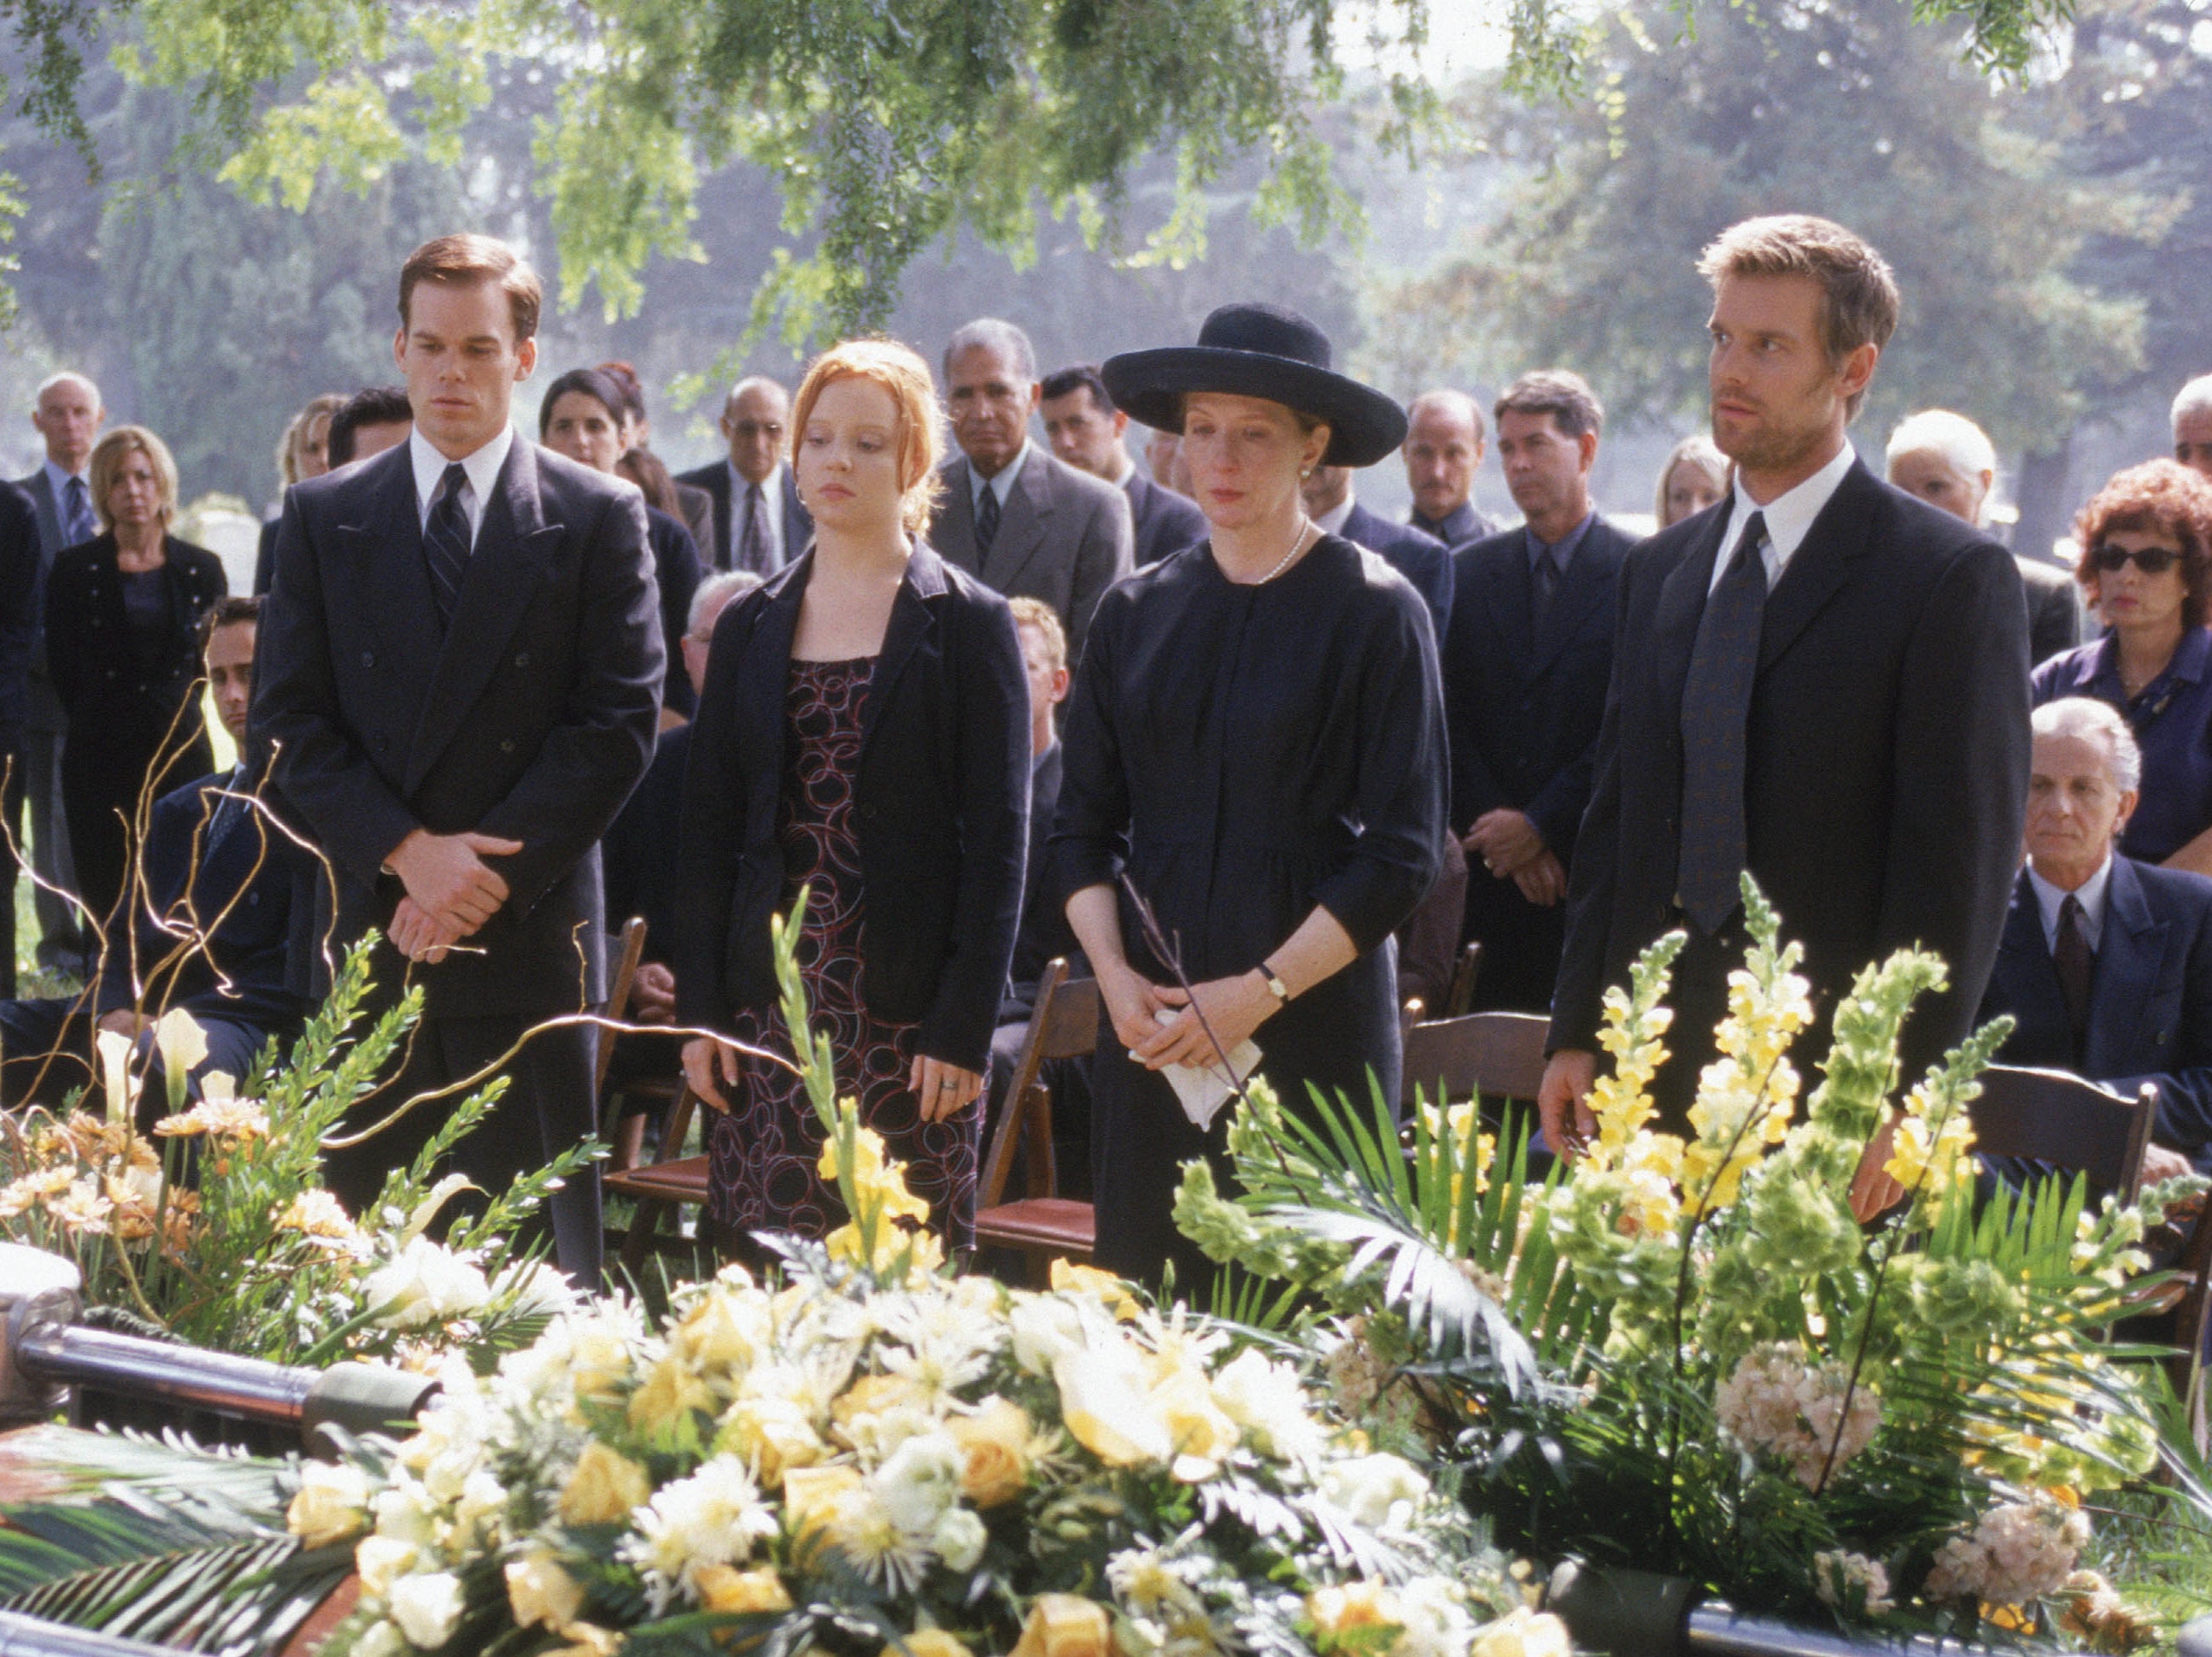 Six Feet Under: The making of TV's death-obsessed masterpiece, 20